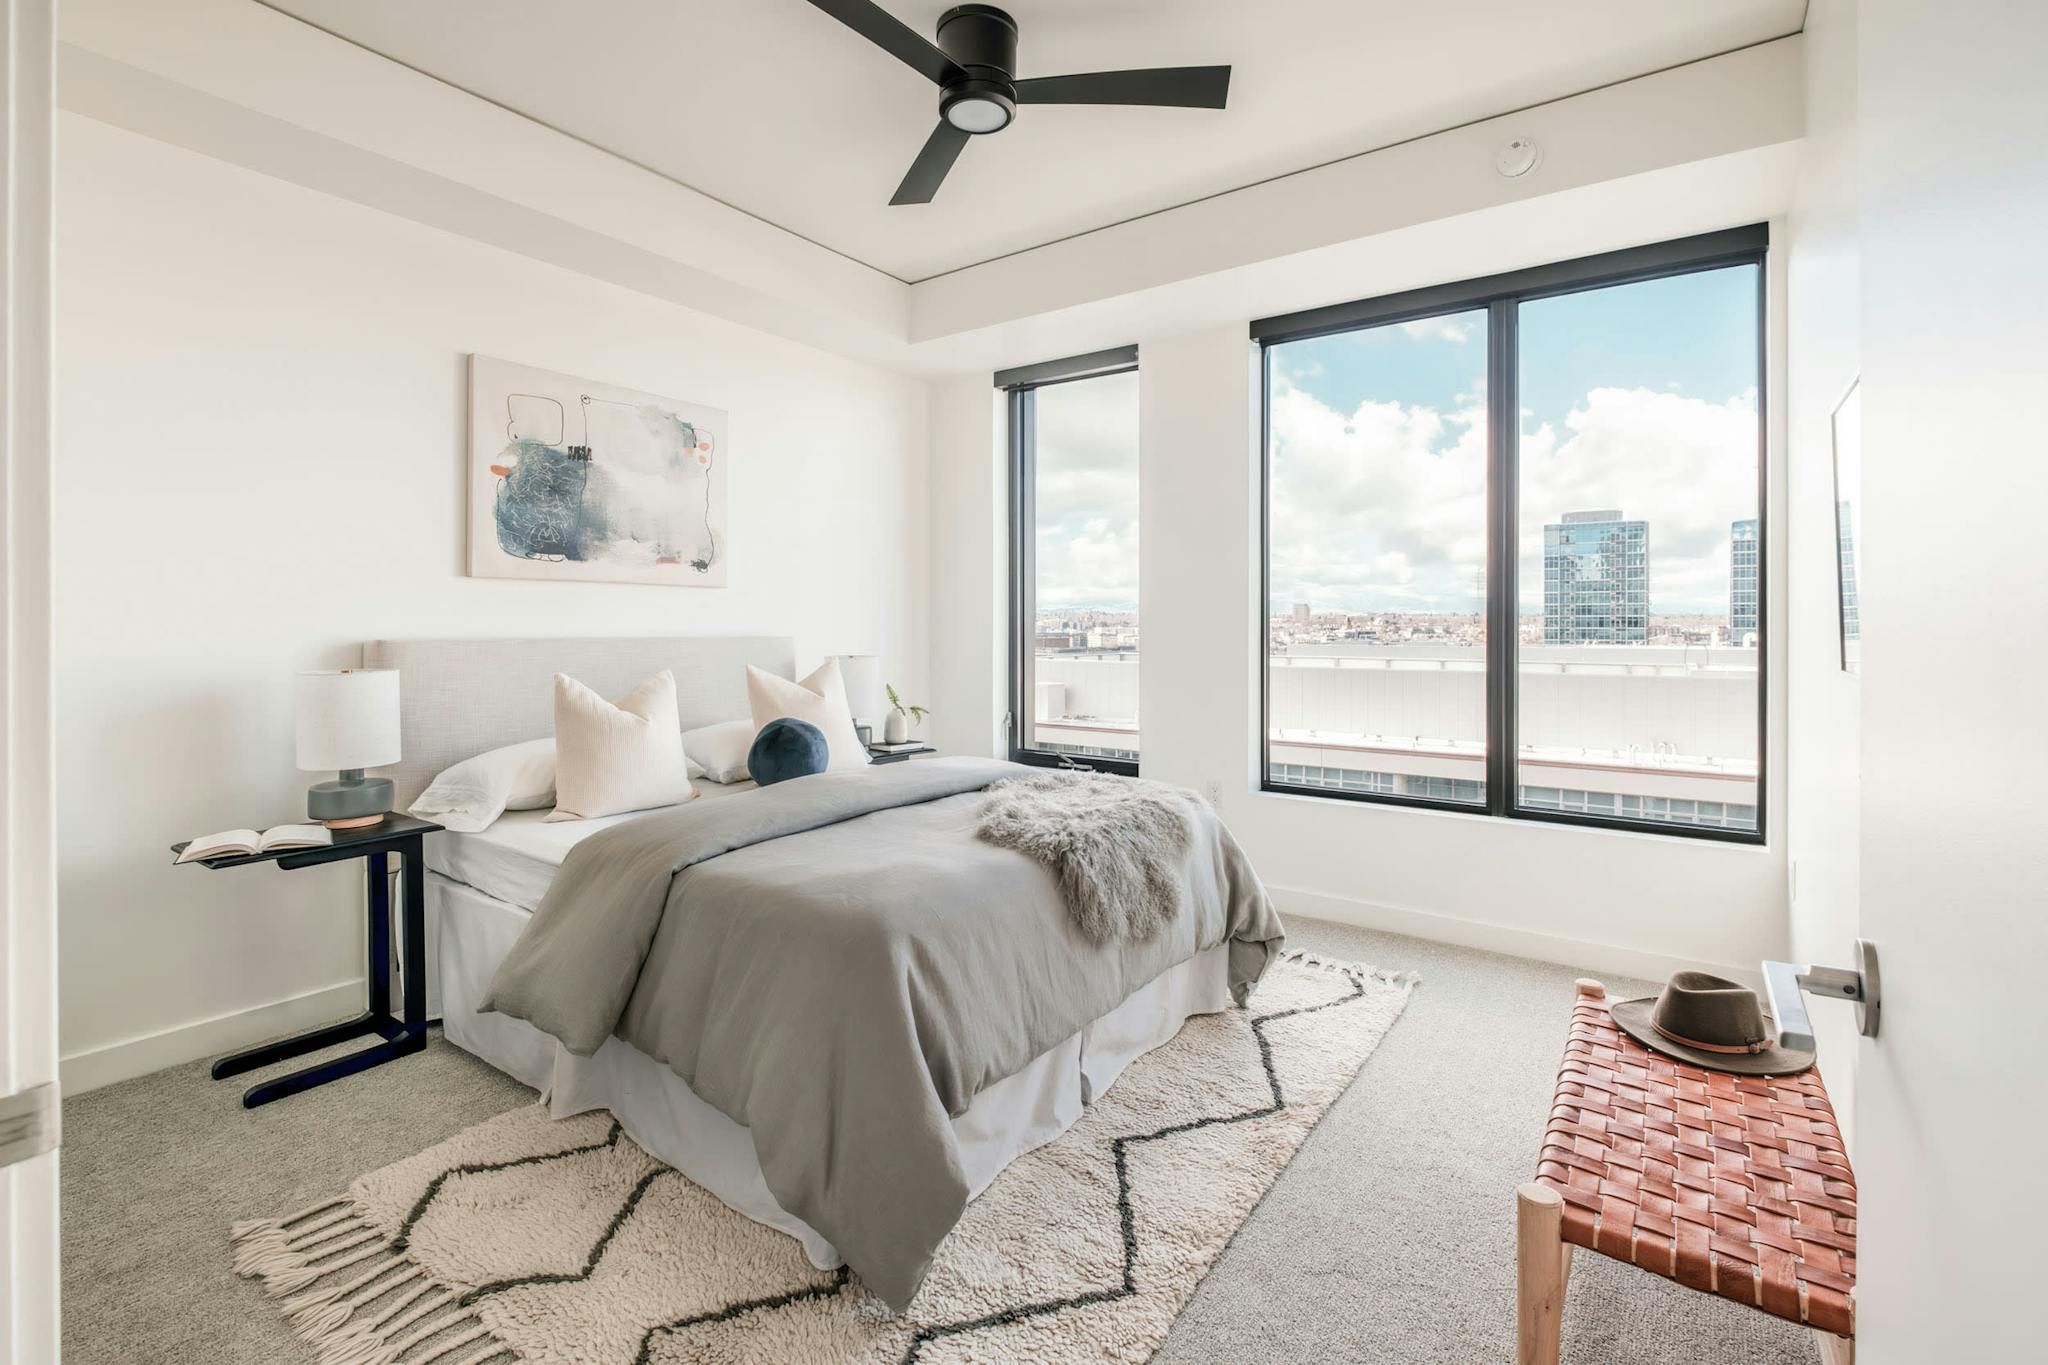 a bedroom with a large bed and a ceiling fan in the corner of the room with a view of the city outside the window